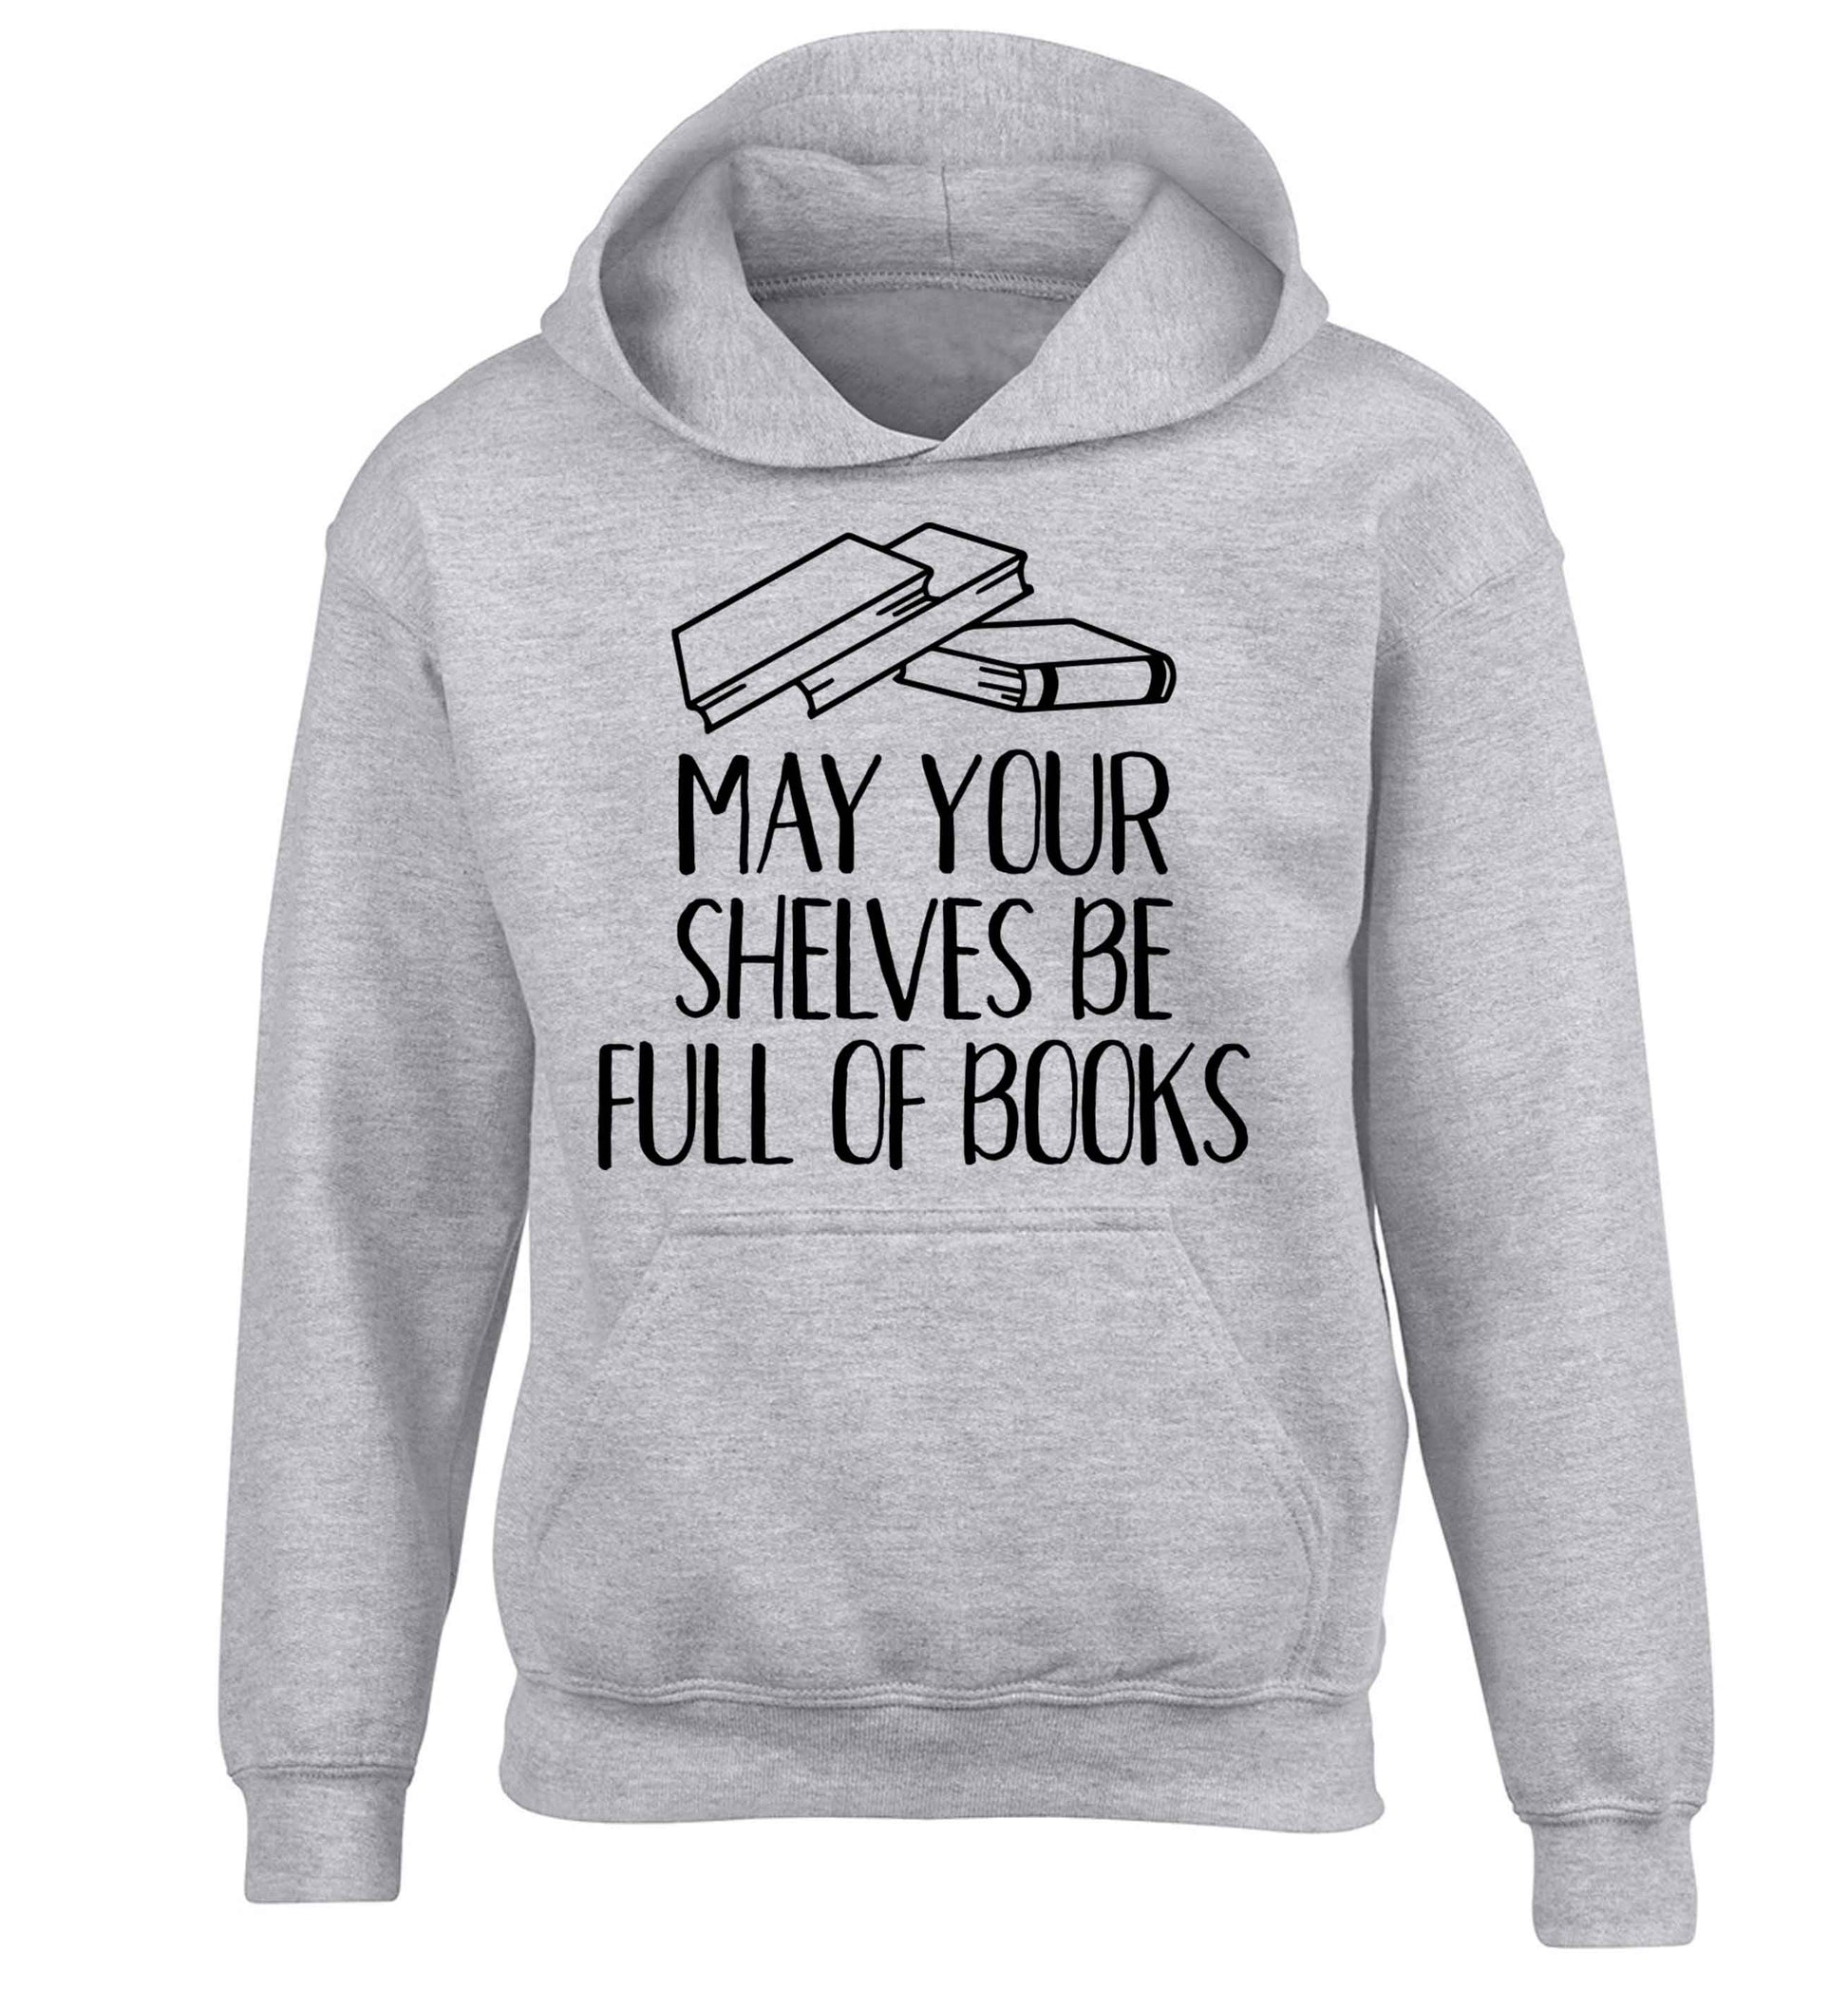 May your shelves be full of books children's grey hoodie 12-13 Years